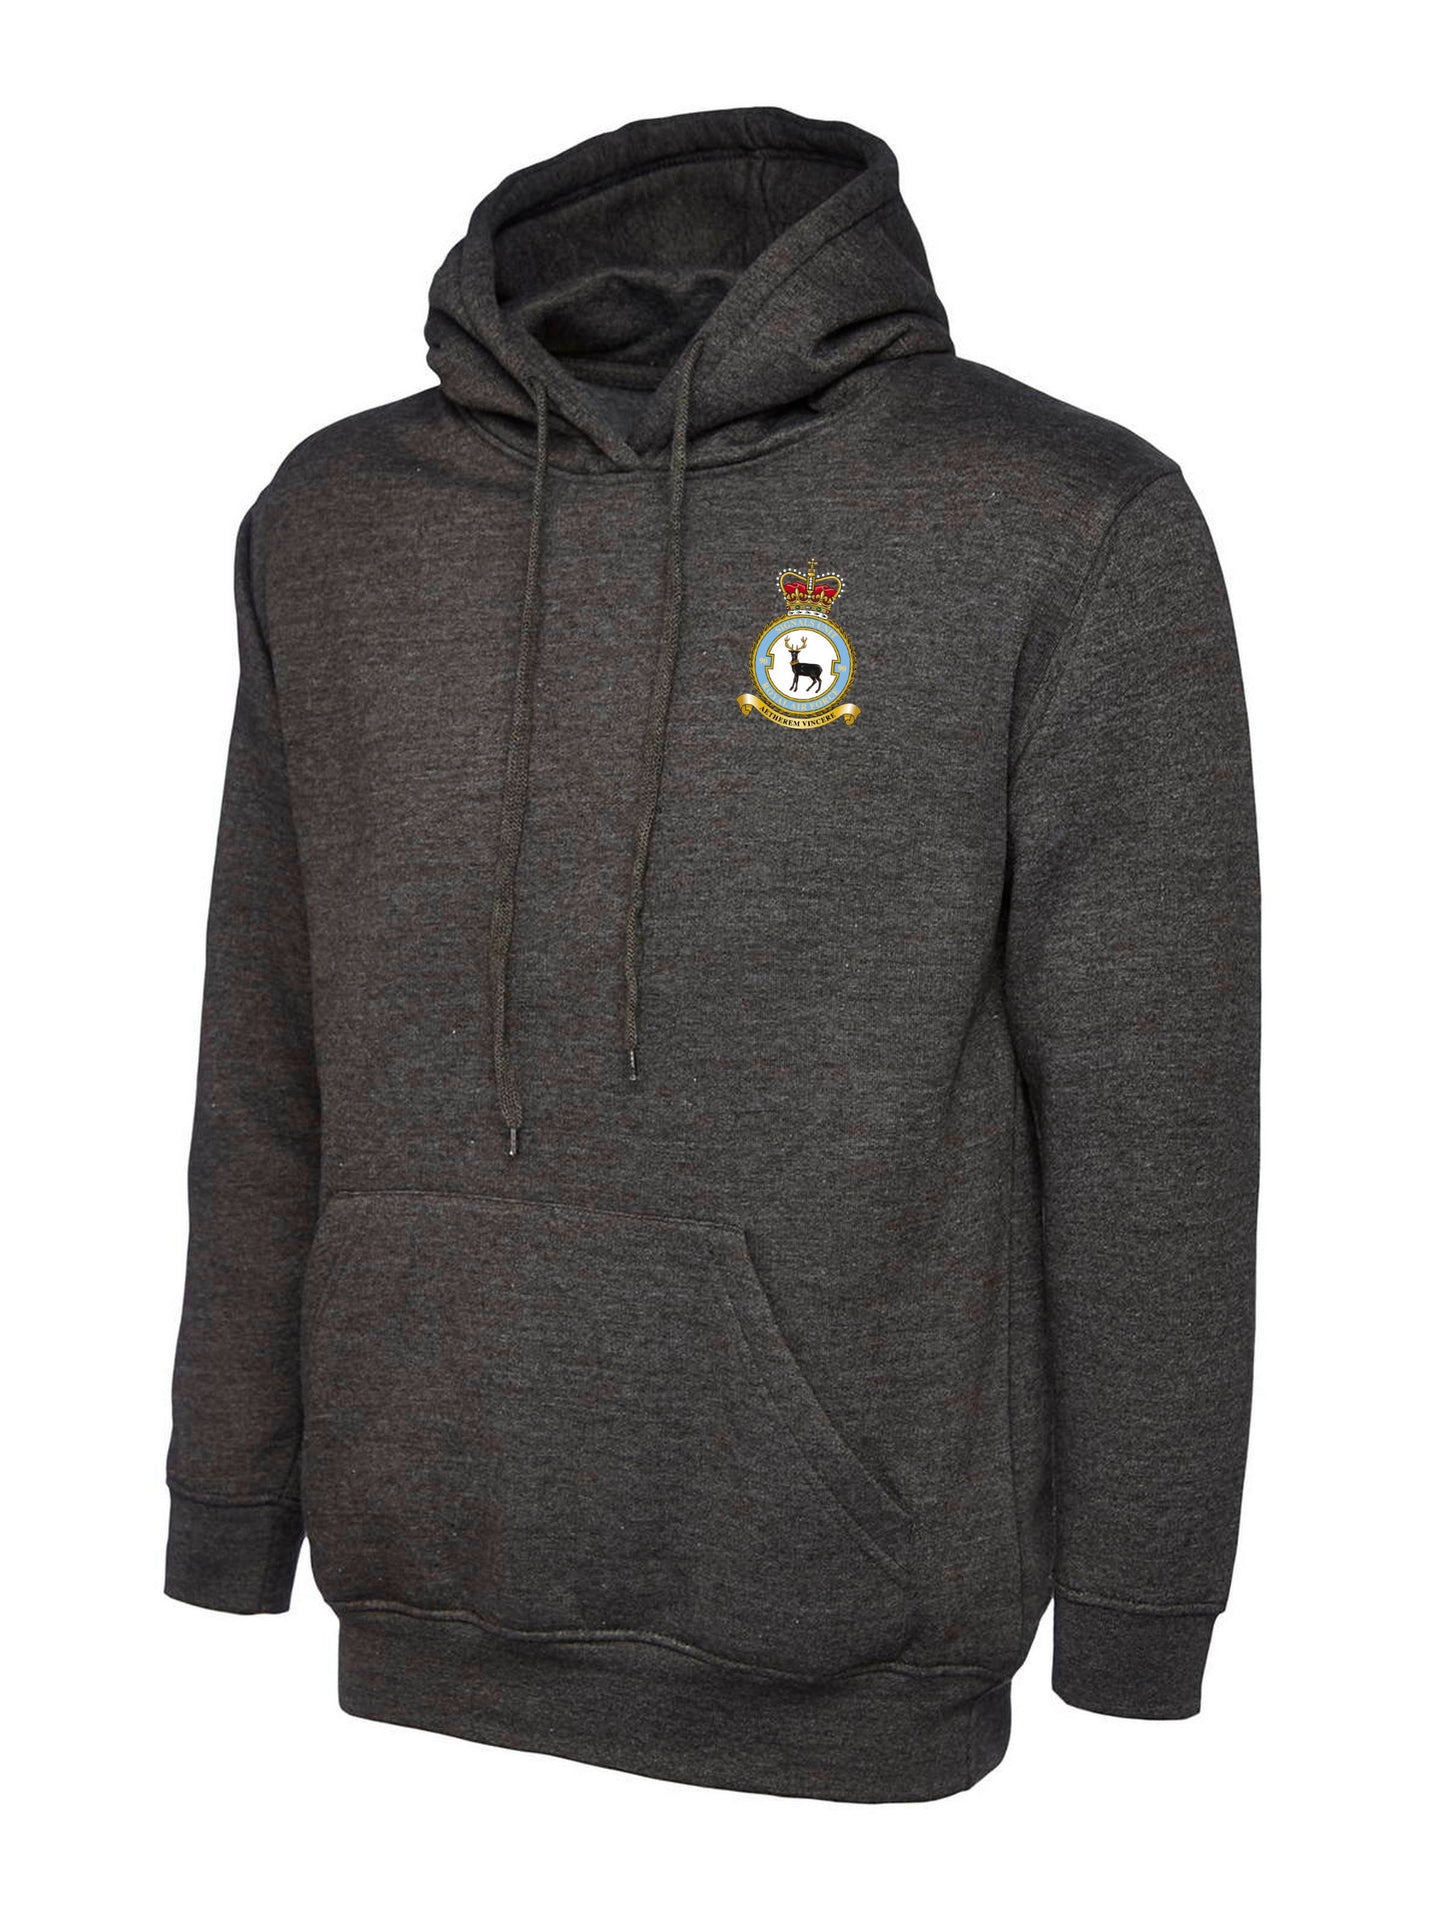 90SU CREST EMBROIDERED HOODIE - The Forces Shop